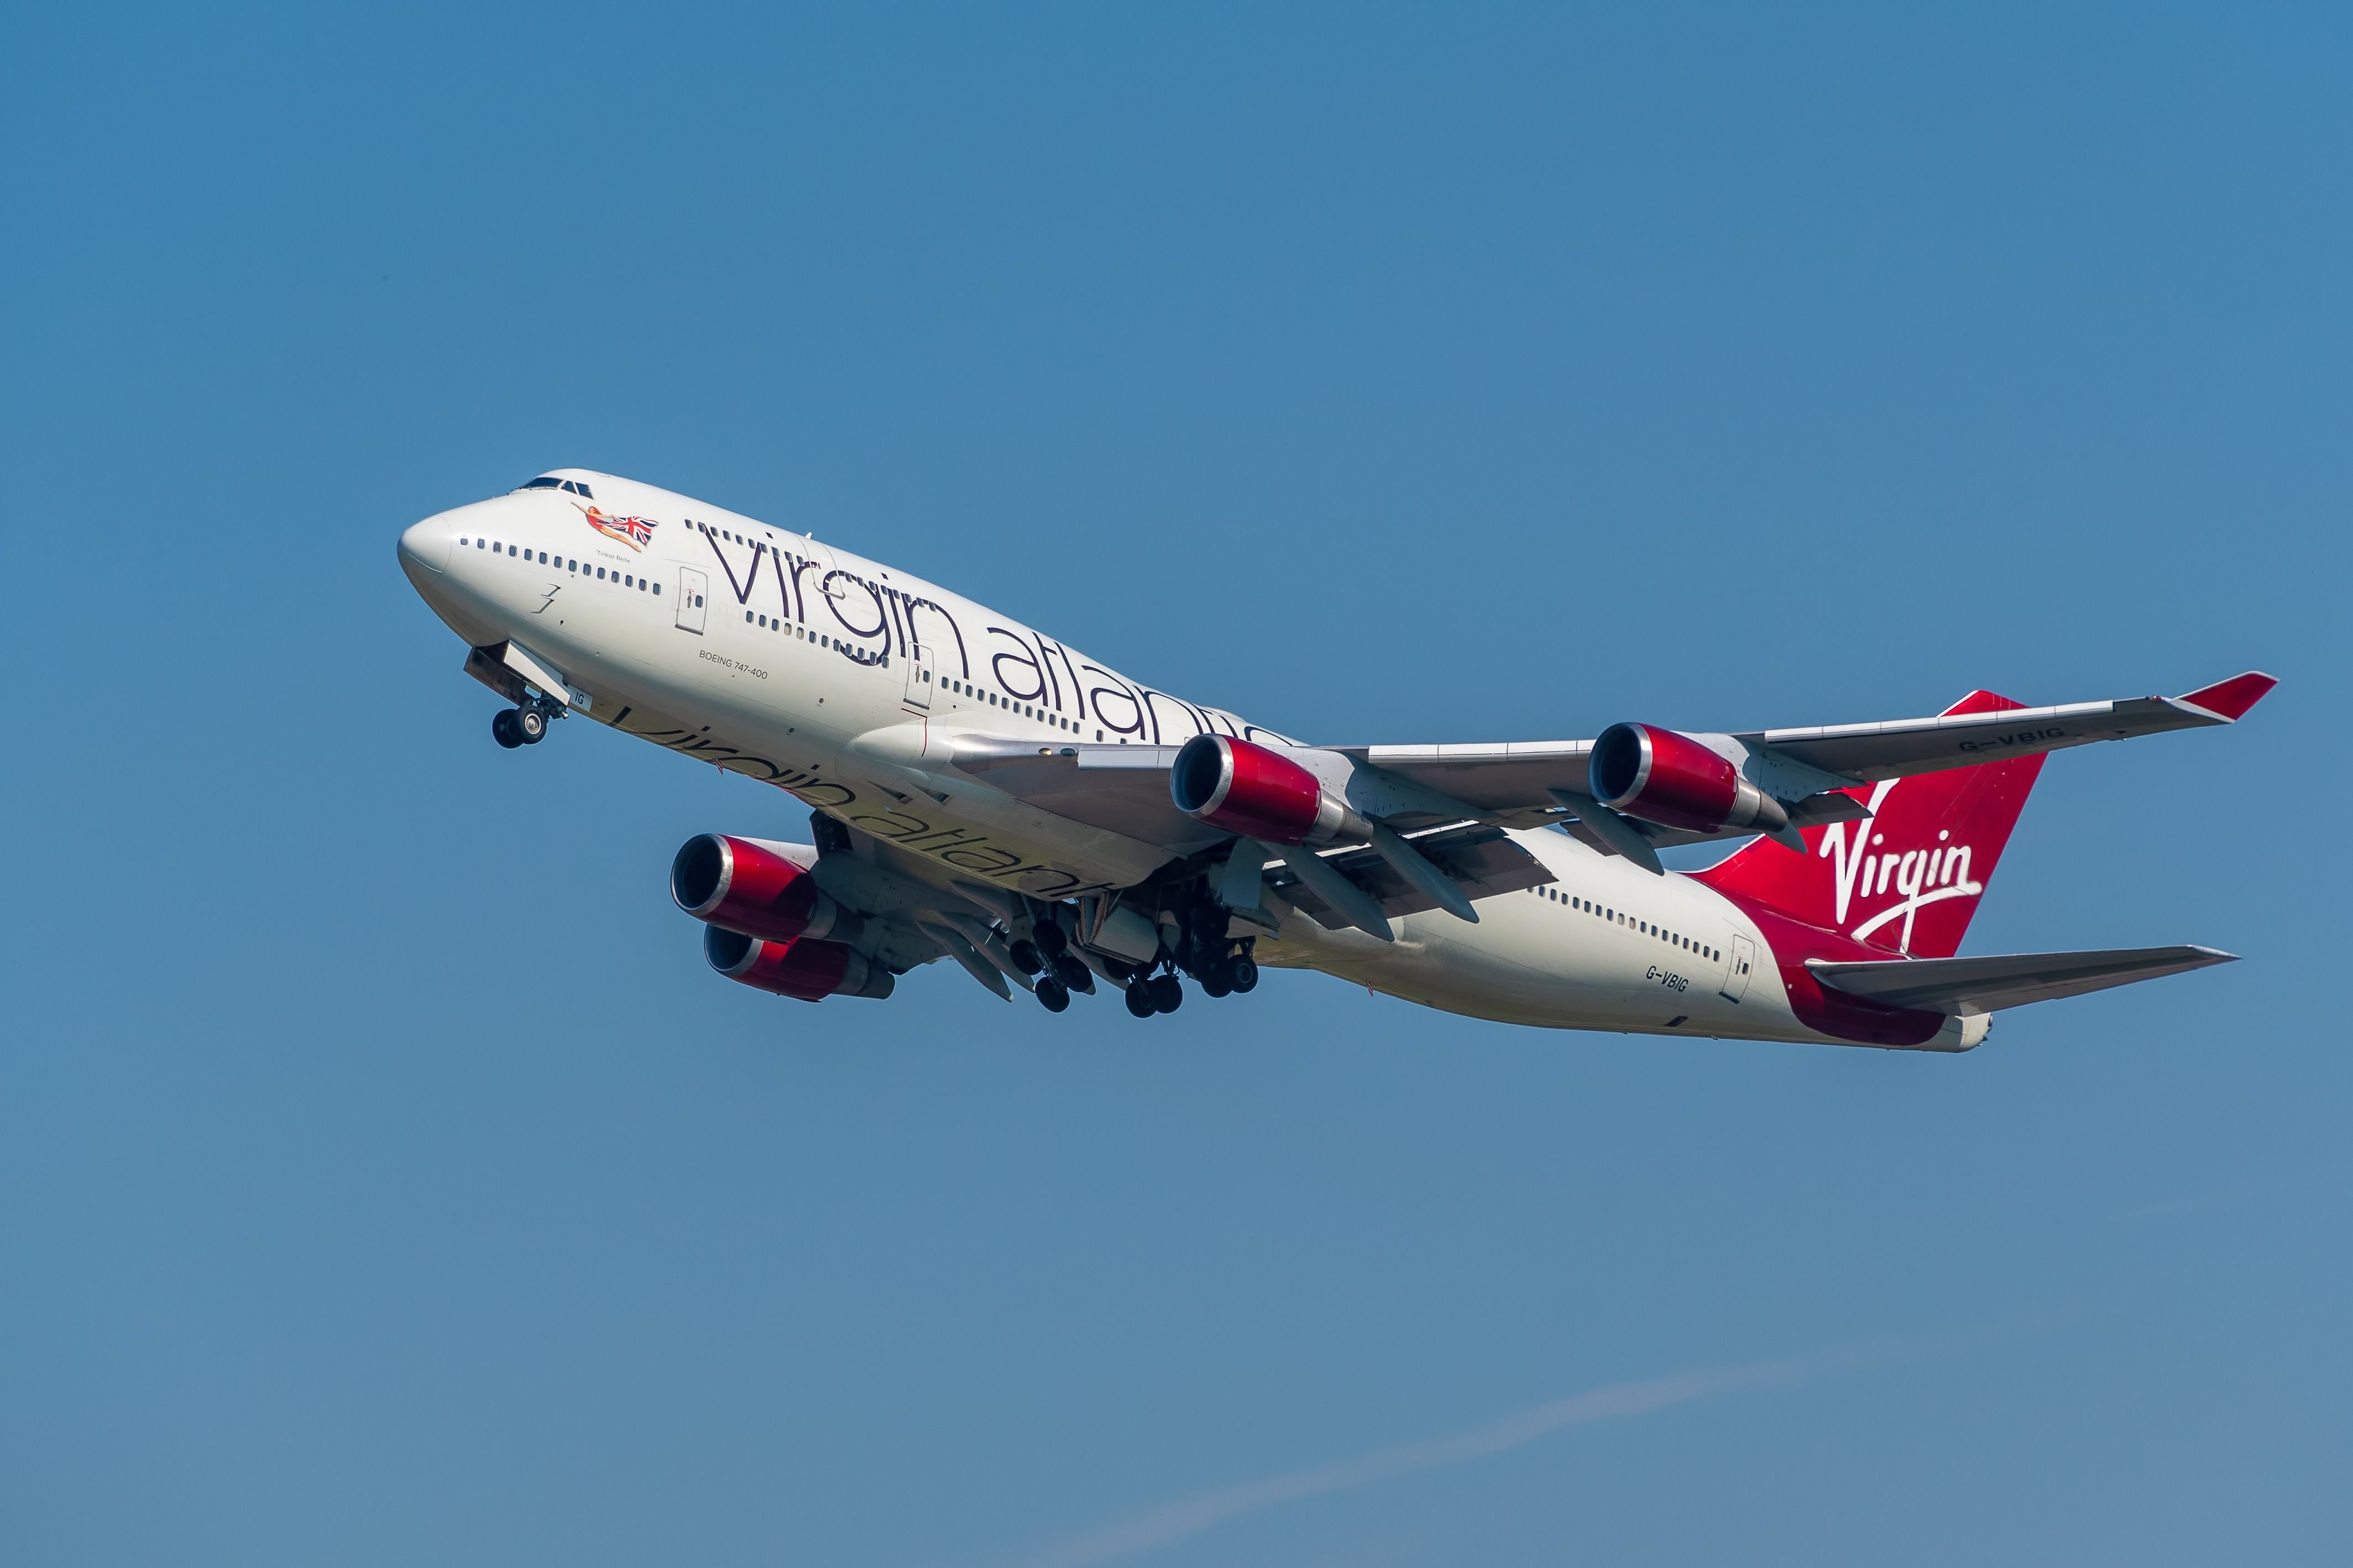 Virgin Atlantic Boeing 747-400 departing from Manchester airport.